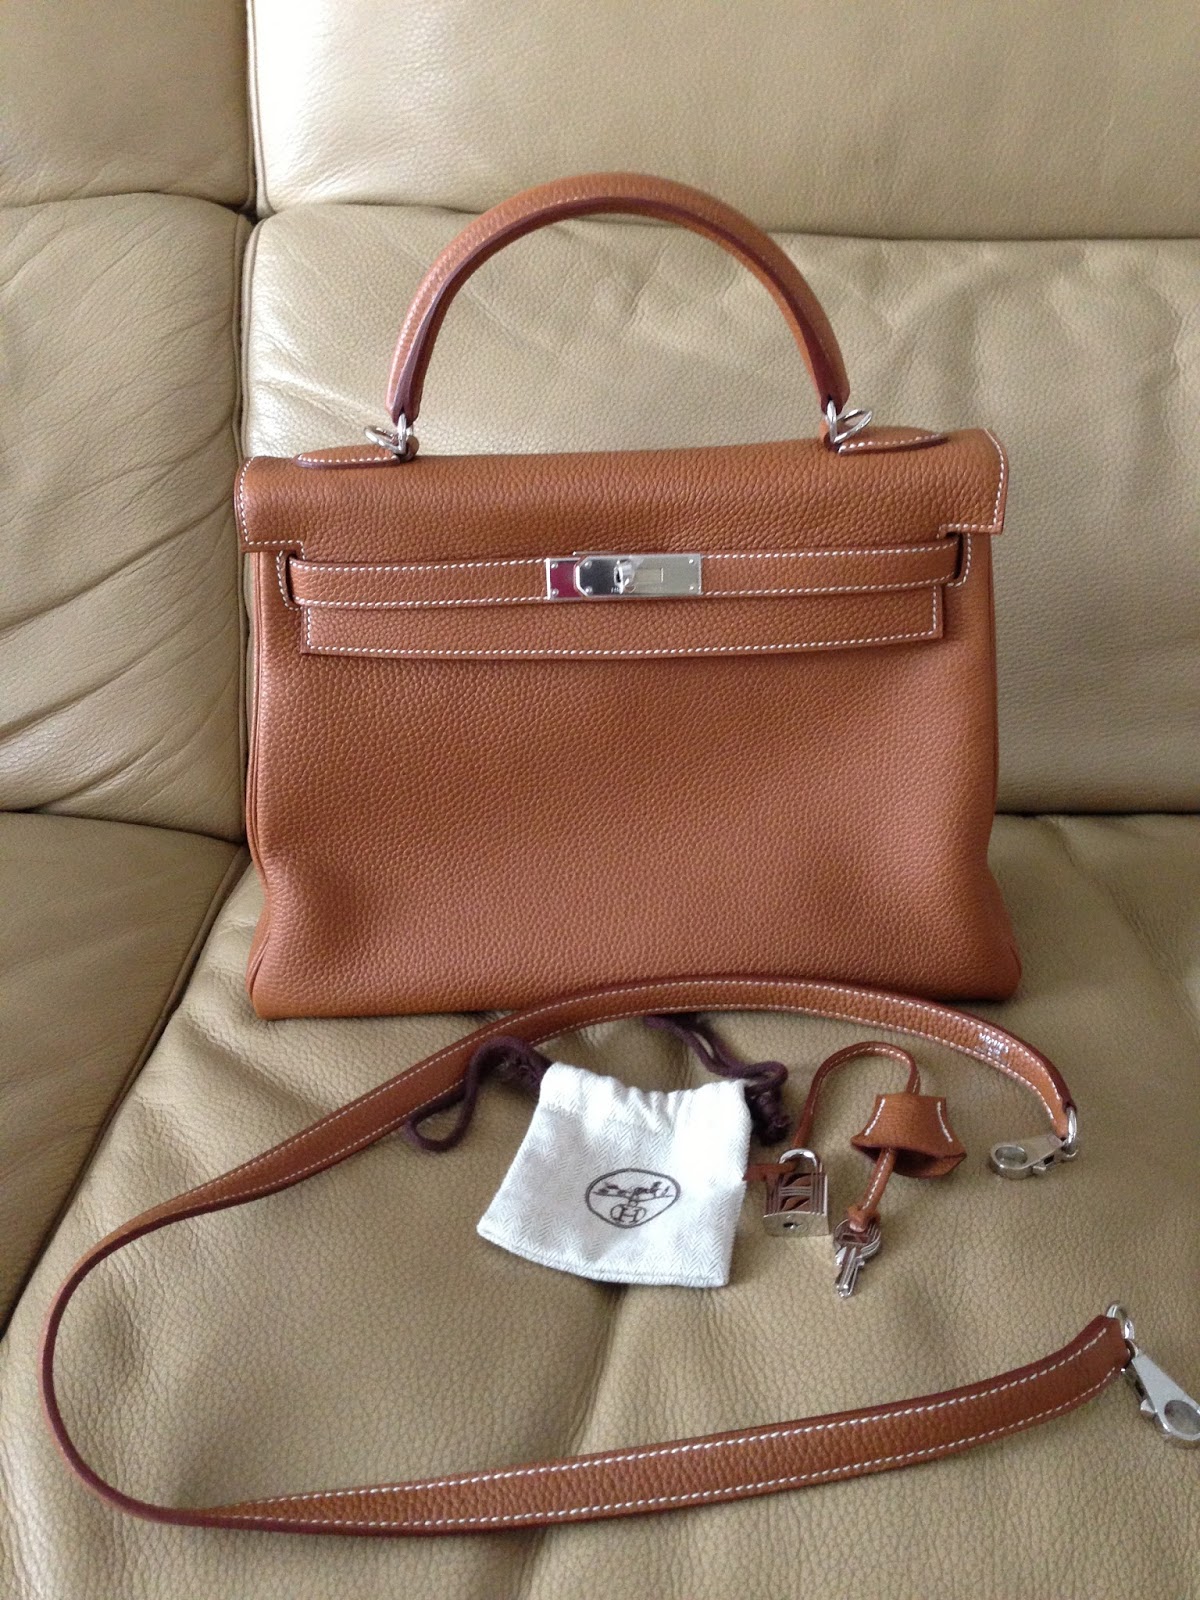 Preloved 100% Authentic Designer Bags for sale